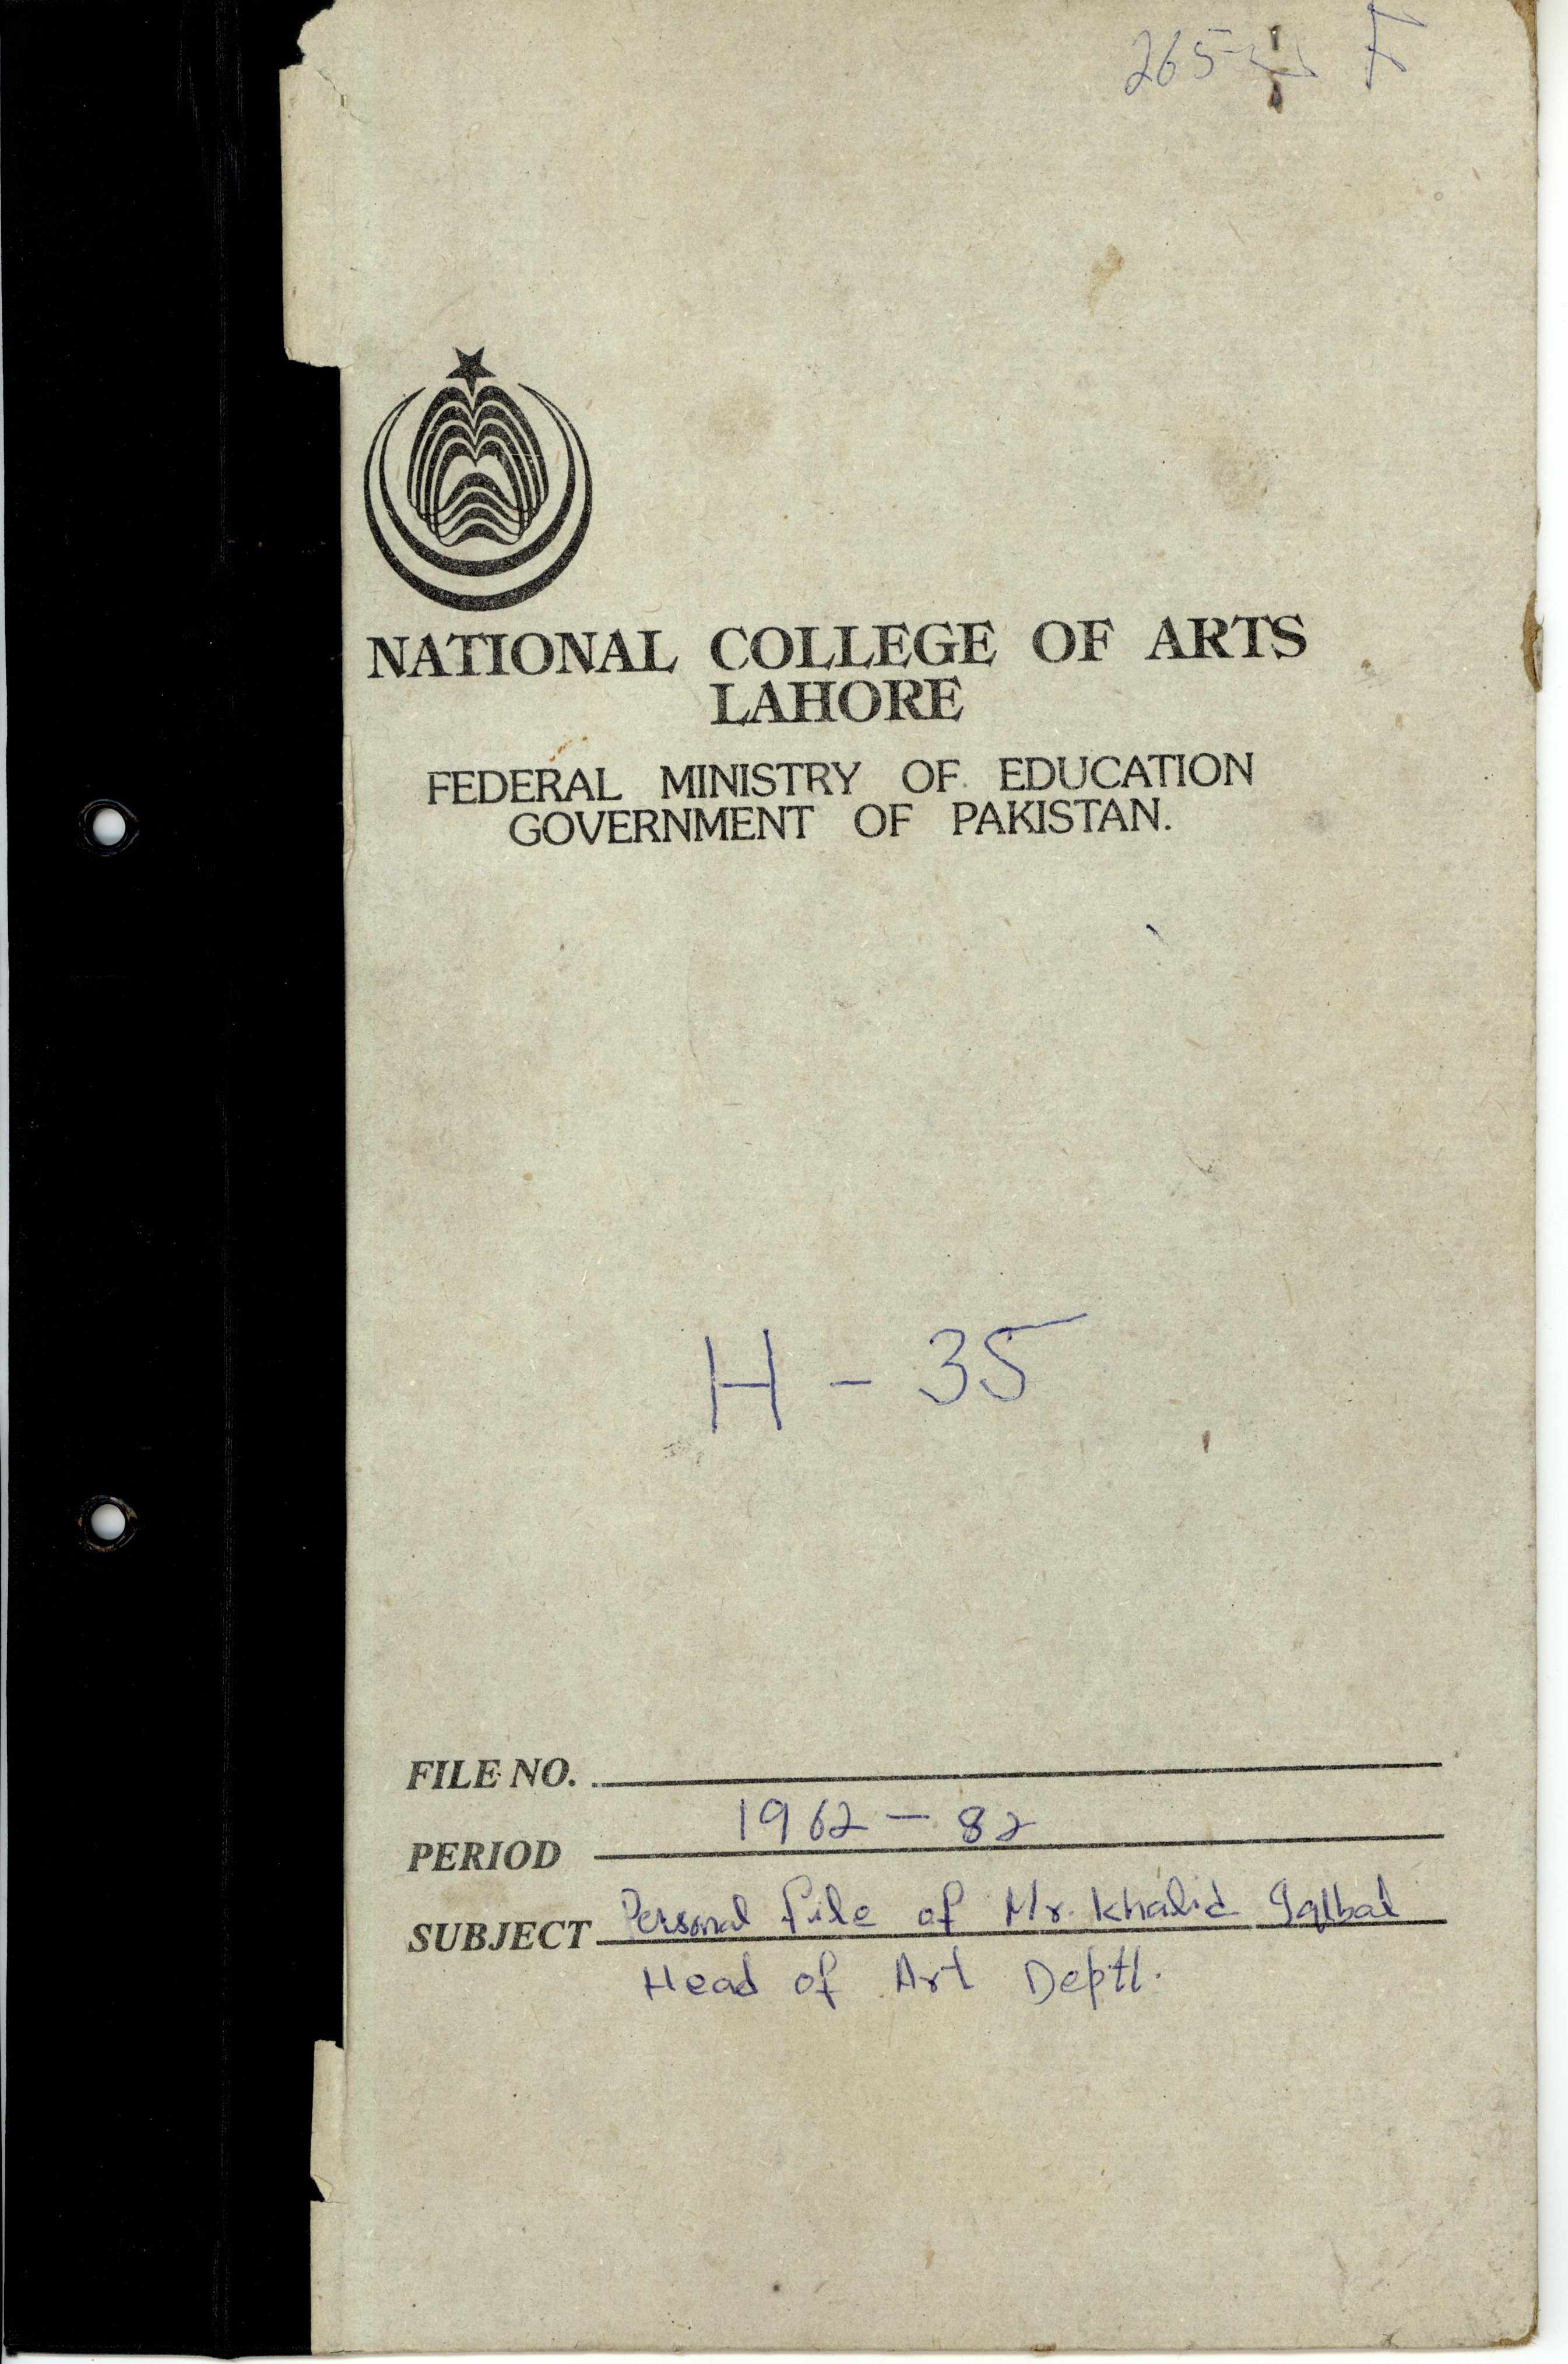 Cover of Khalid Iqbal’s personnel file at the National College of Arts, Lahore